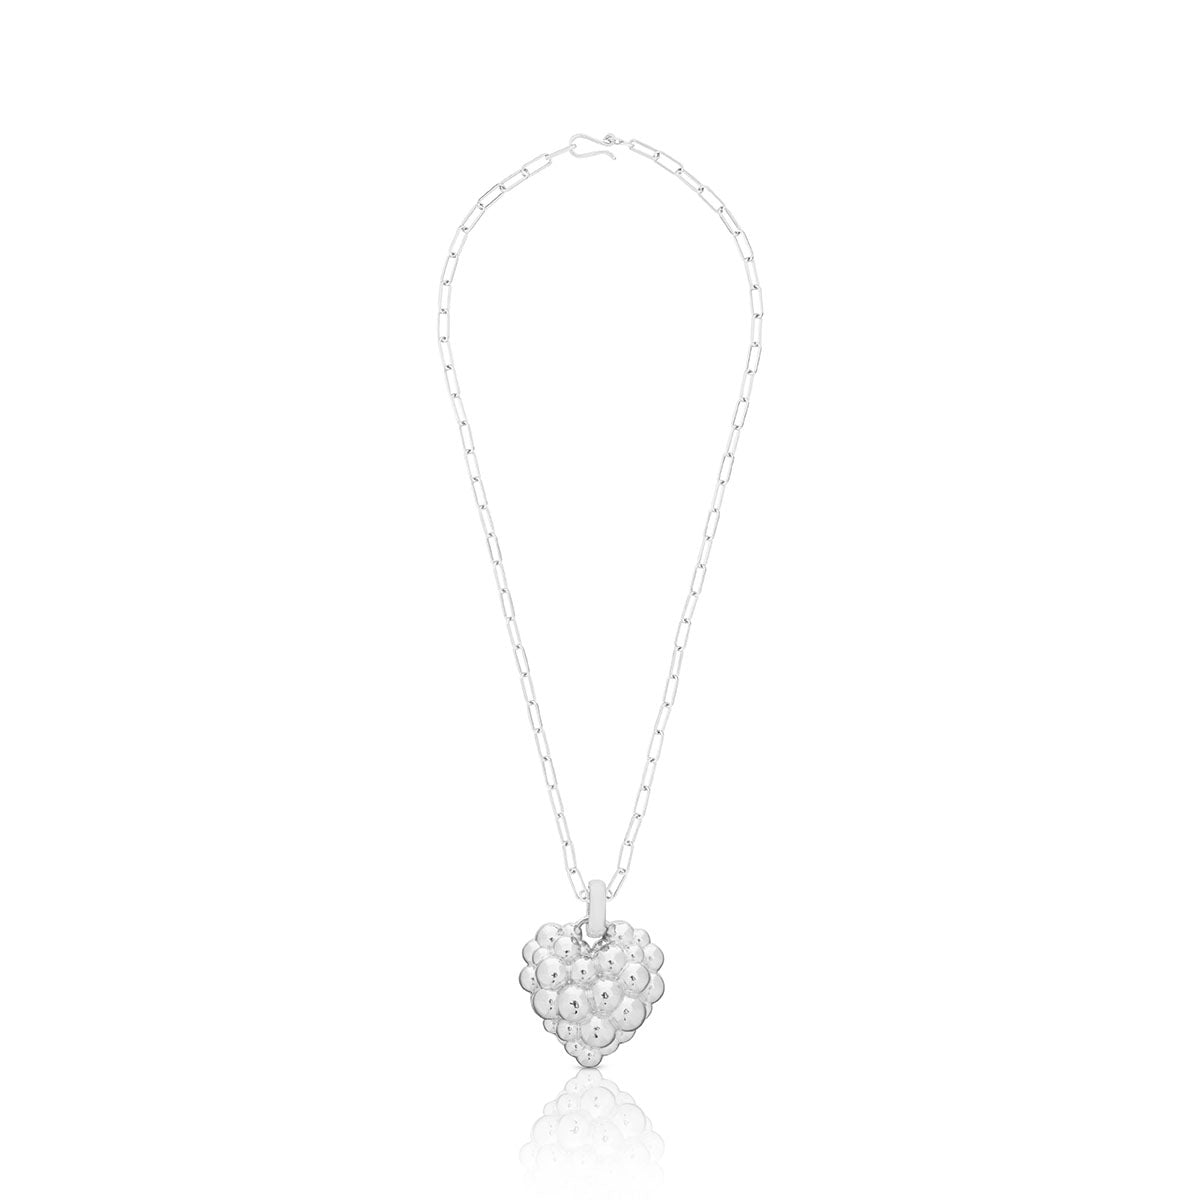 LOVE NECKLACE - LARGE SILVER